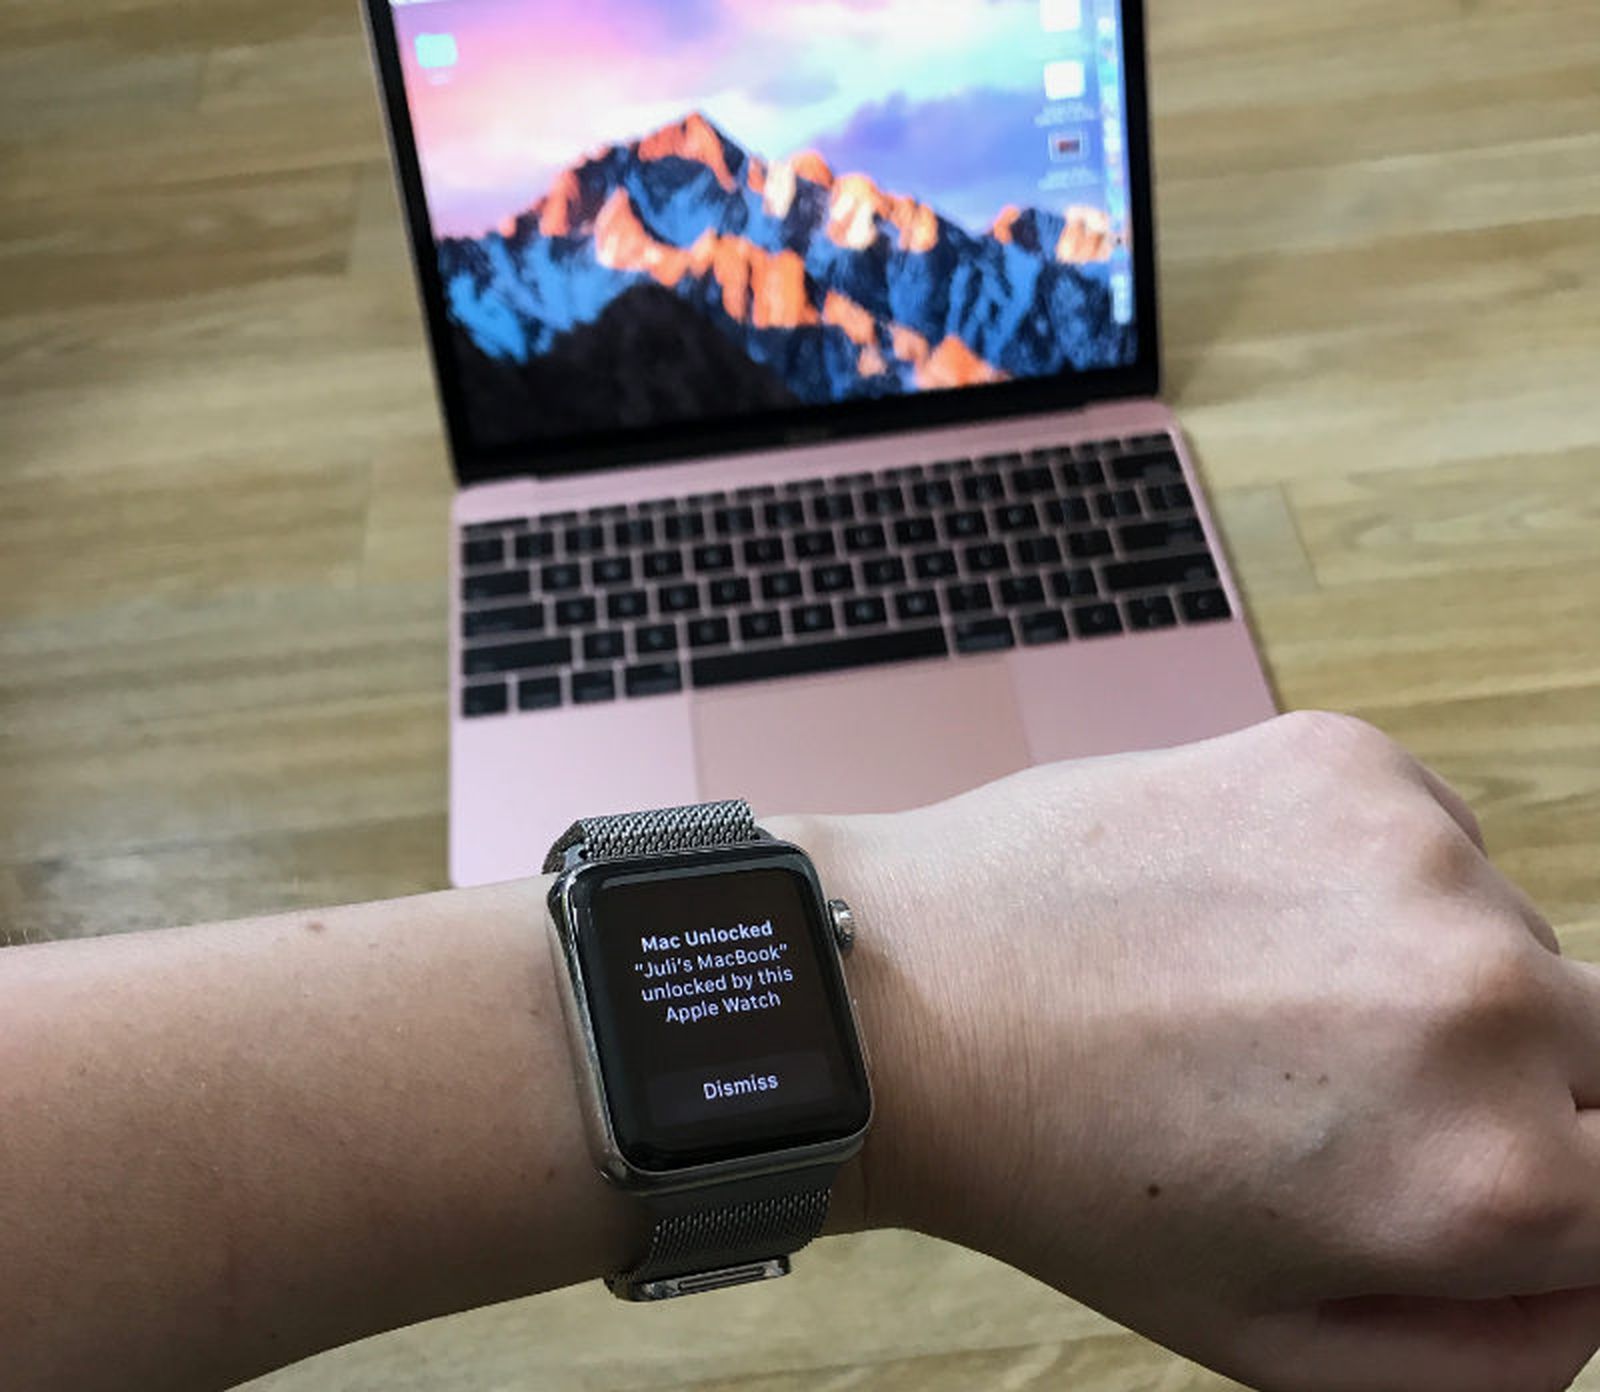 How to unlock my macbook pro with my apple watch microsoft family safety